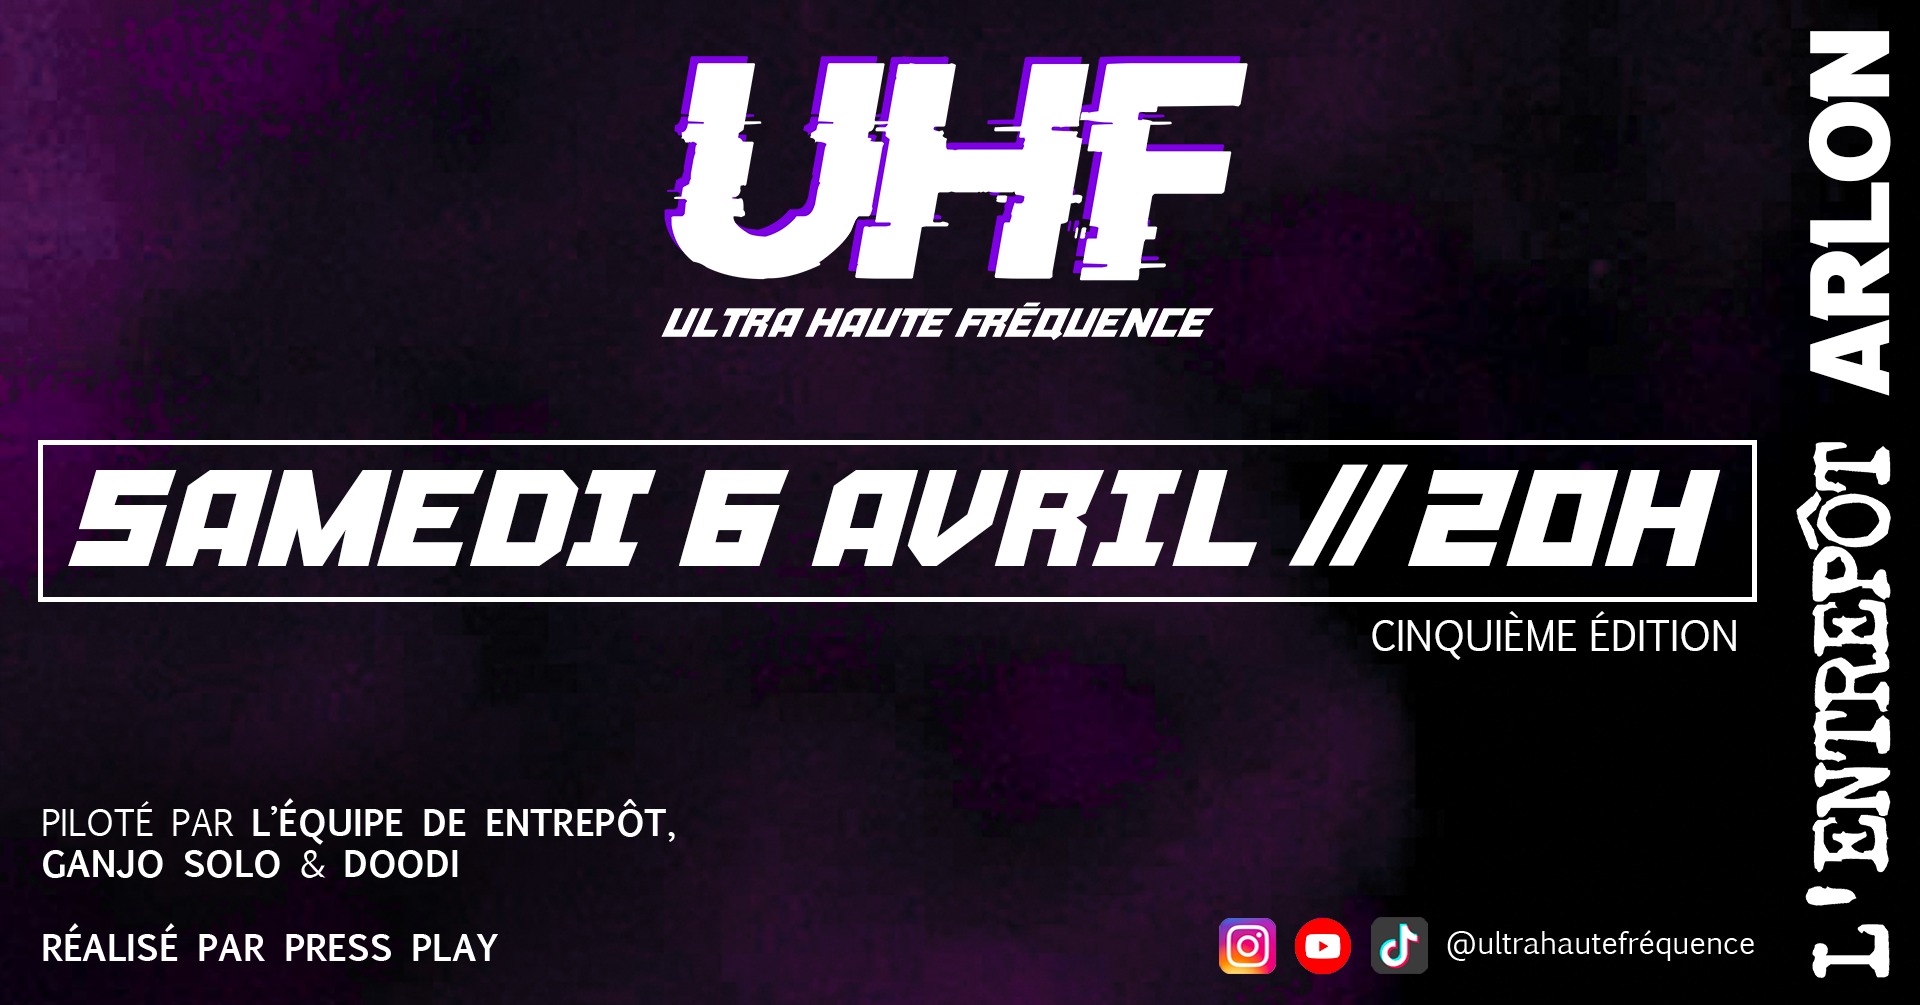 UHF (Ultra Haute Fréquence)